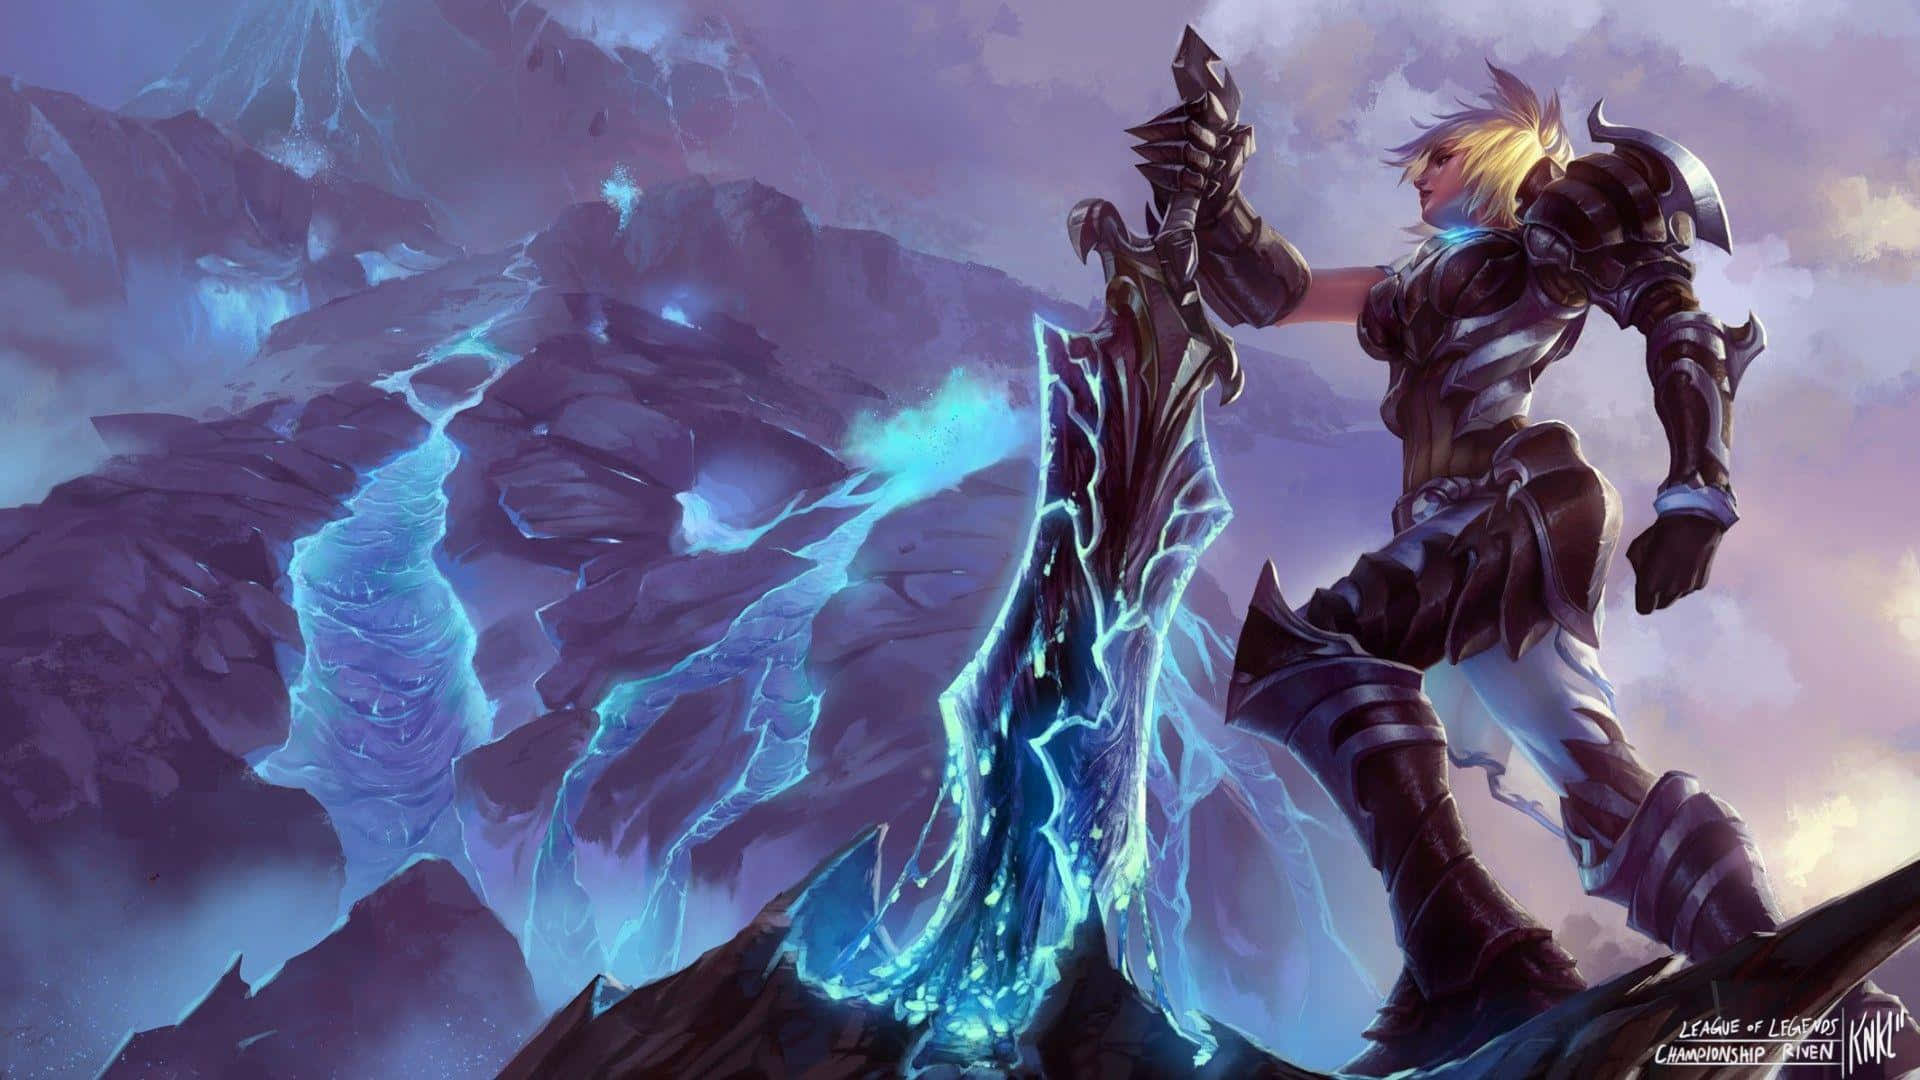 Upgrade your gaming experience by playing League of Legends on your laptop Wallpaper